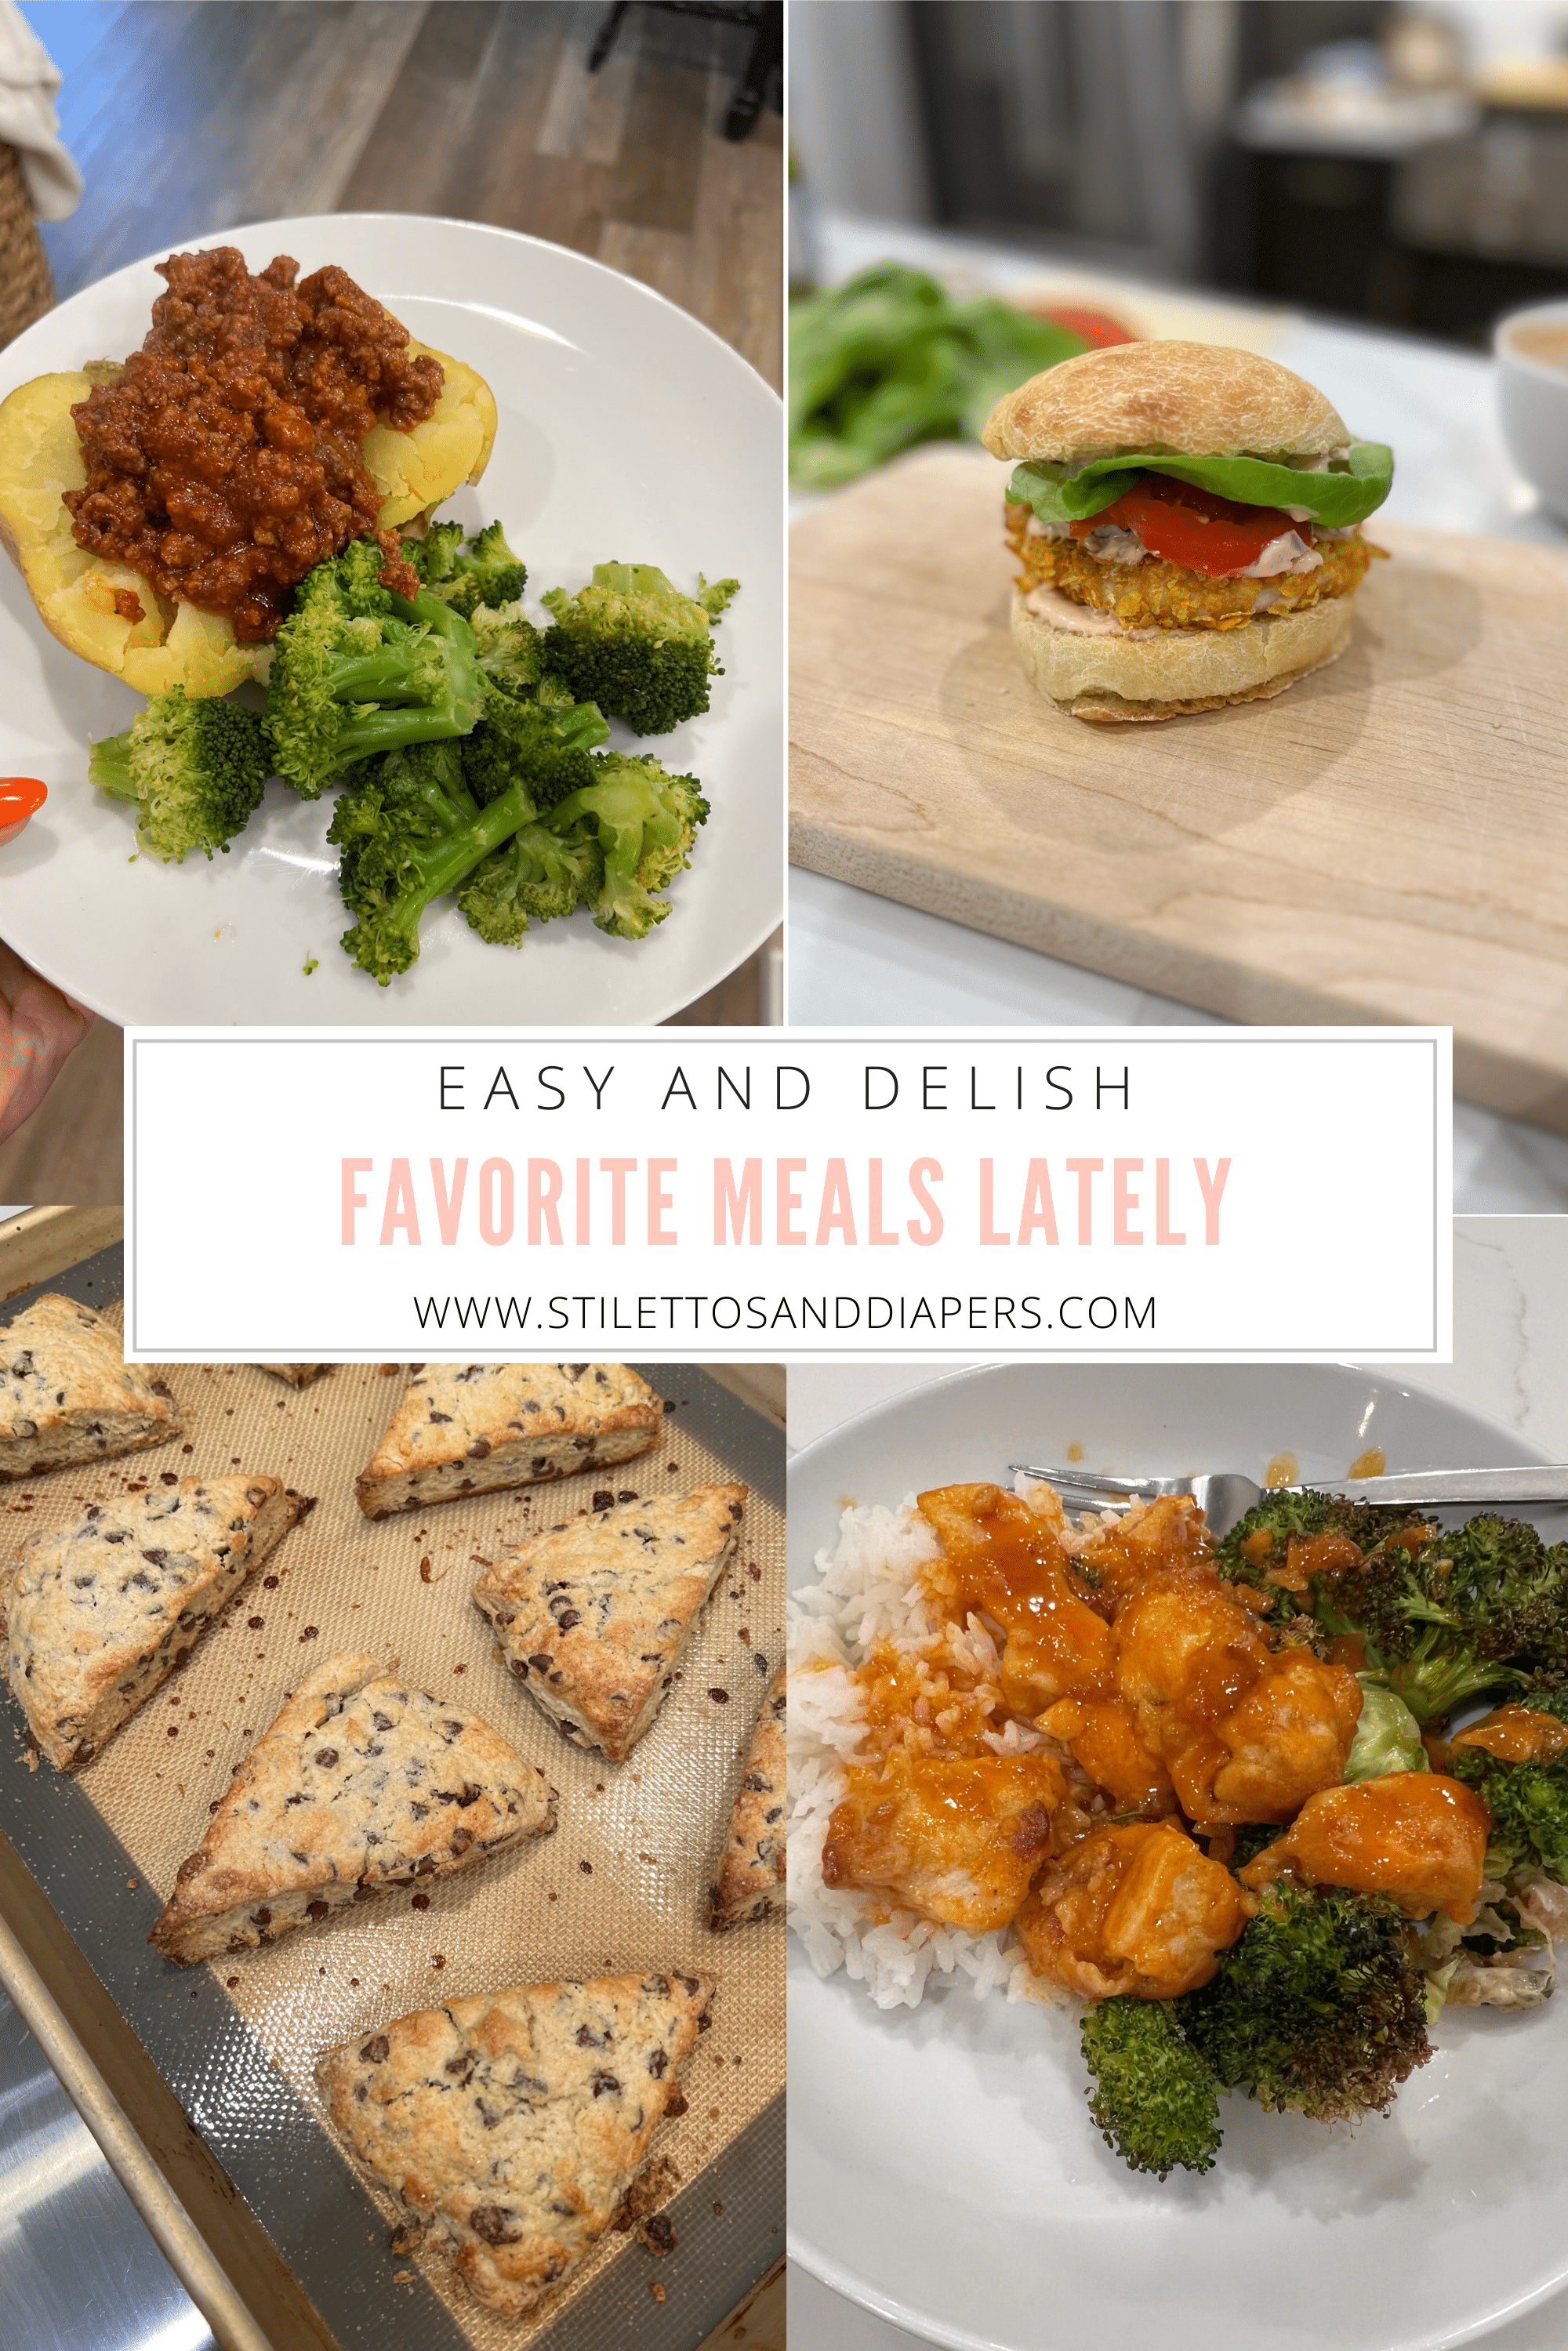 Favorite Meals lately, family friendly dinners, weeknight easy meals, stilettos and diapers